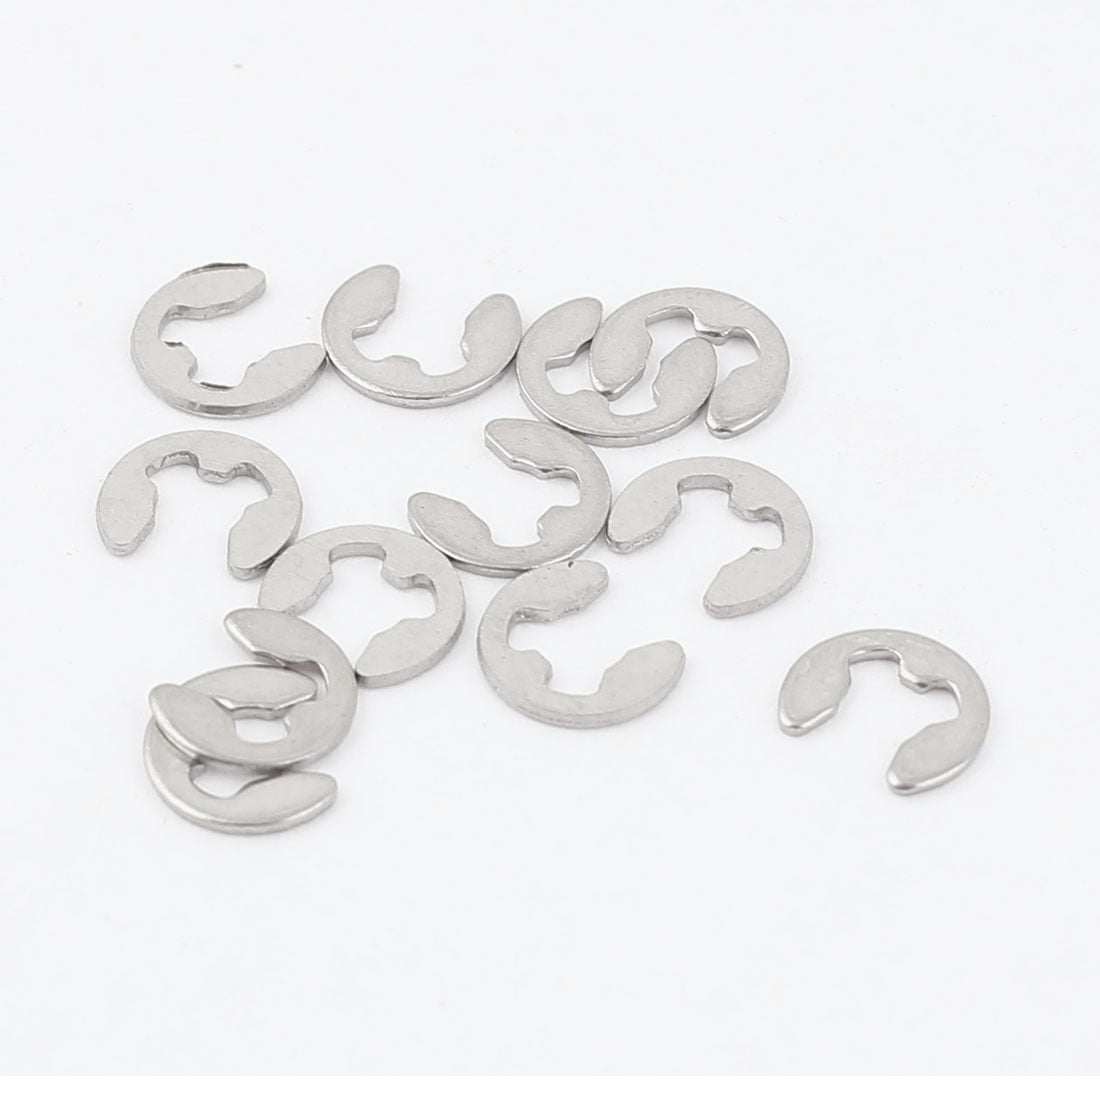 Snap Ring Φ2.5mm  Stainless steel E-Clip Circlip 100 pcs 